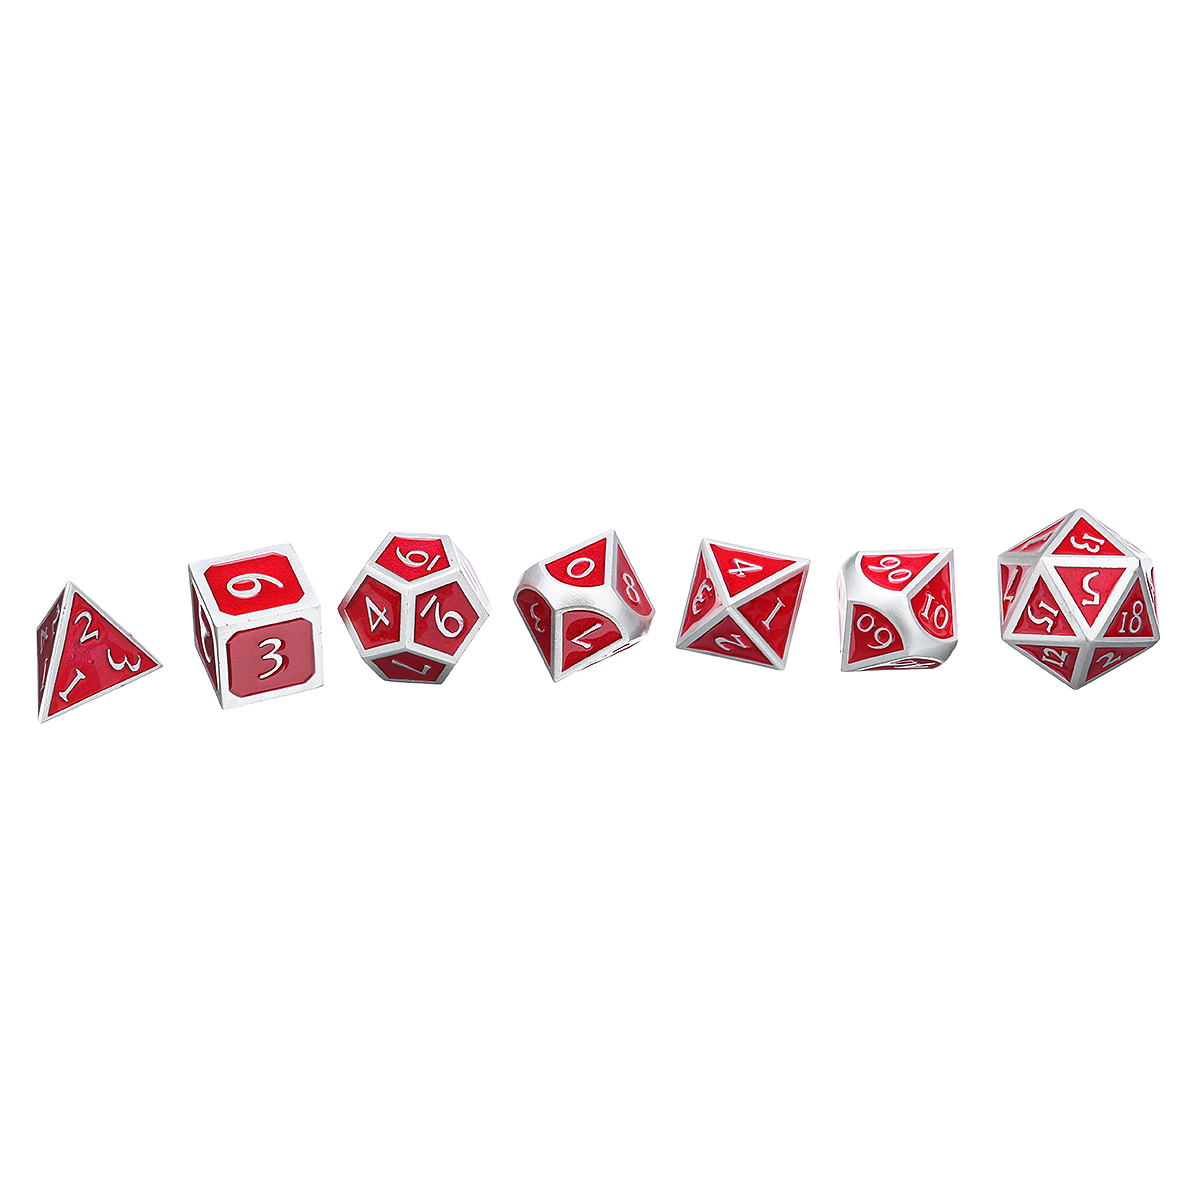 Red-Antique-Color-Solid-Metal-Polyhedral-Dices-Role-Playing-RPG-Gadget-7-Dice-Set-With-Bag-1425967-4